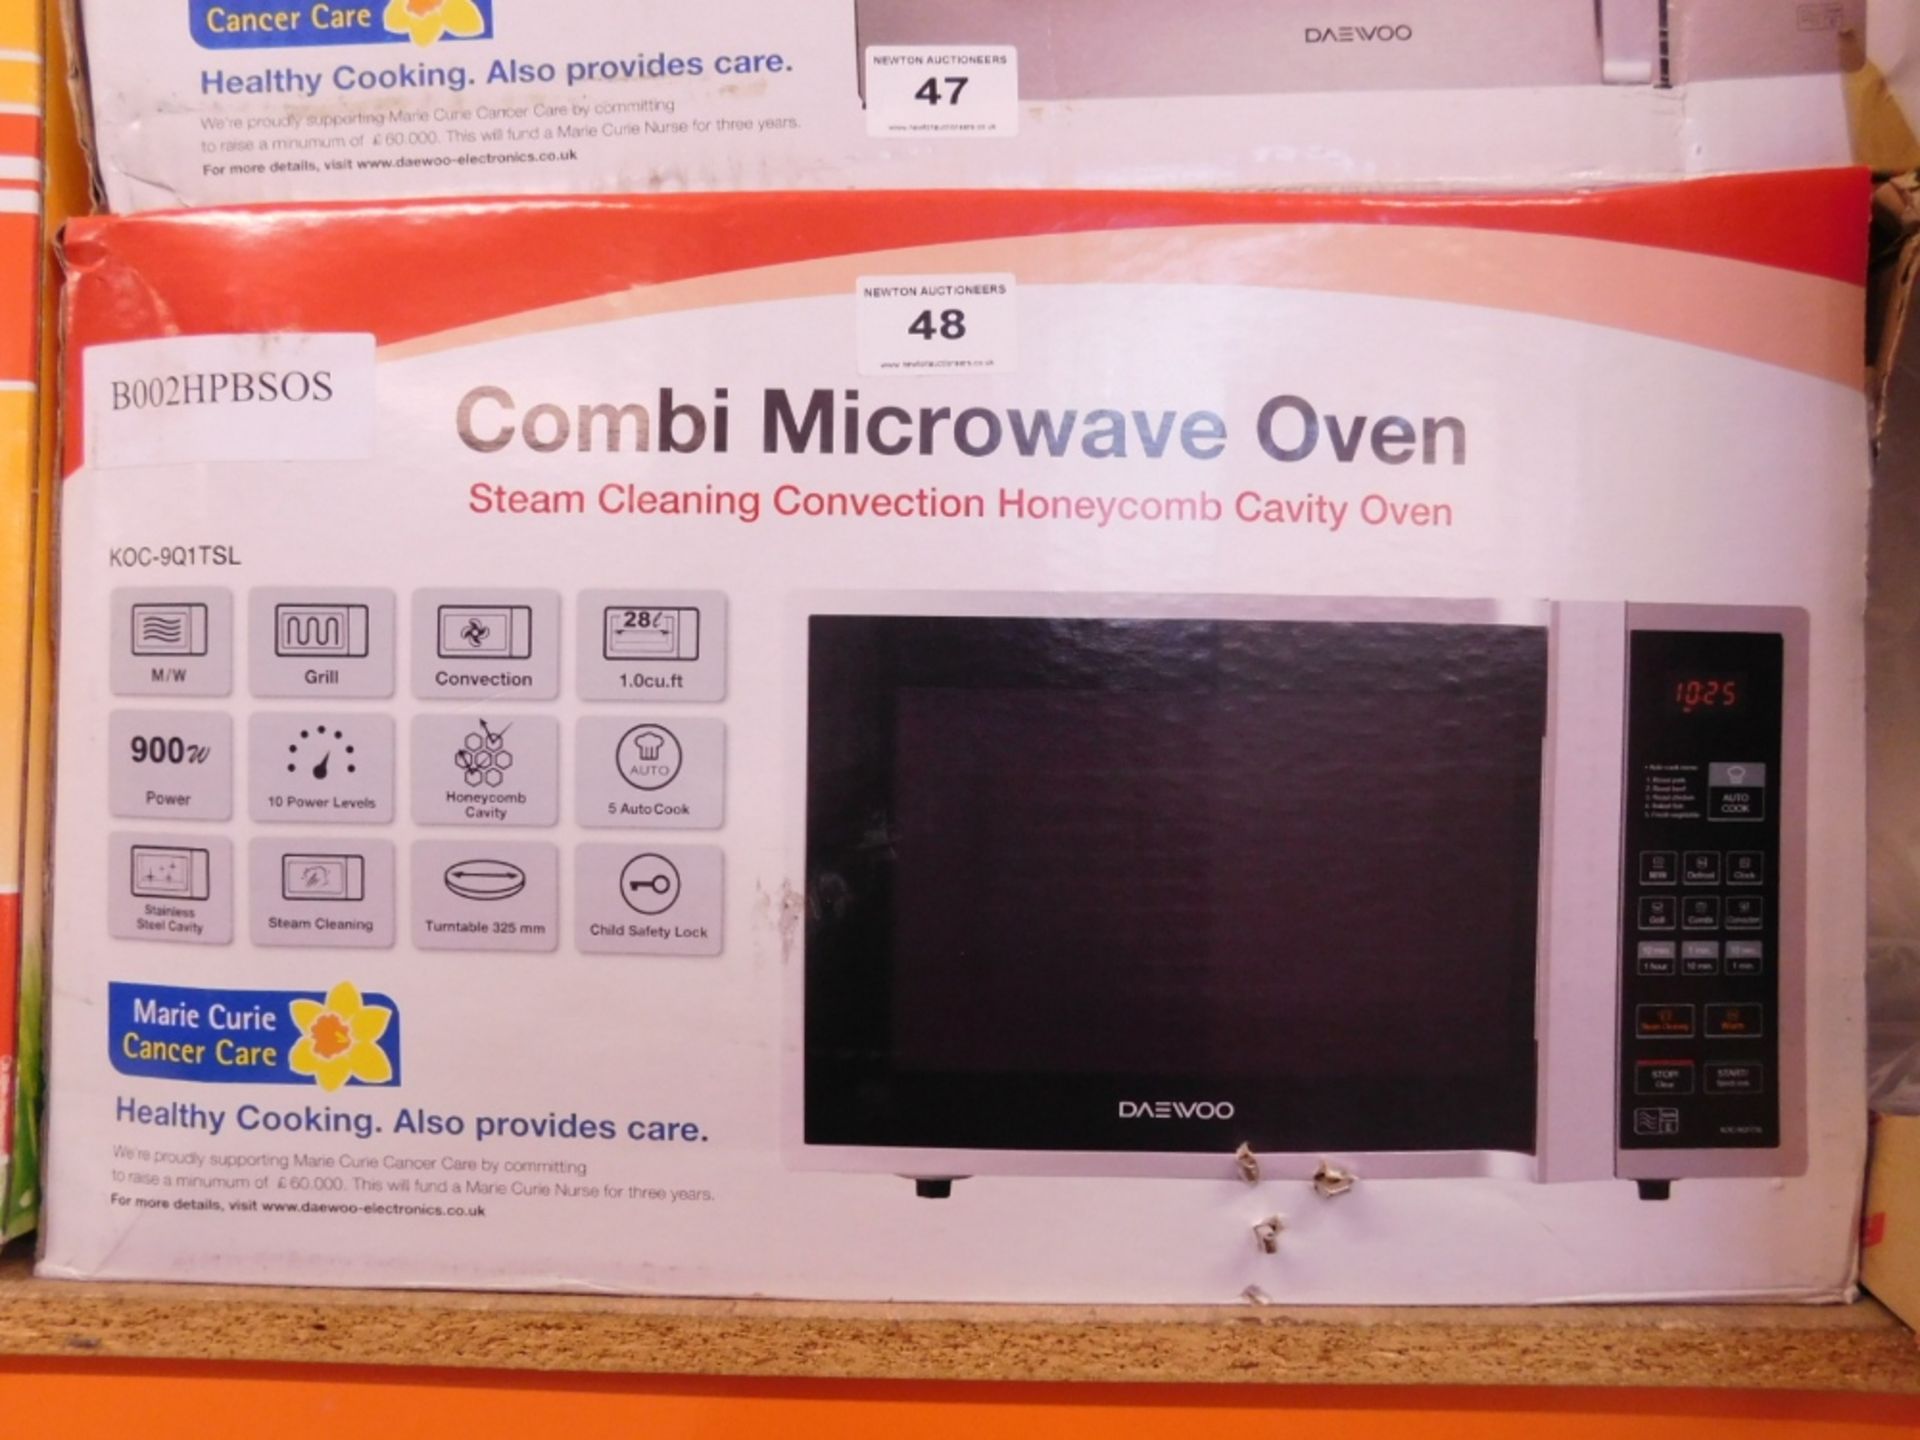 1 BOXED DAEWOO KOC-9Q4T 28L 900W STAINLESS STEEL COMBINATION MICROWAVE OVEN RRP £129.99